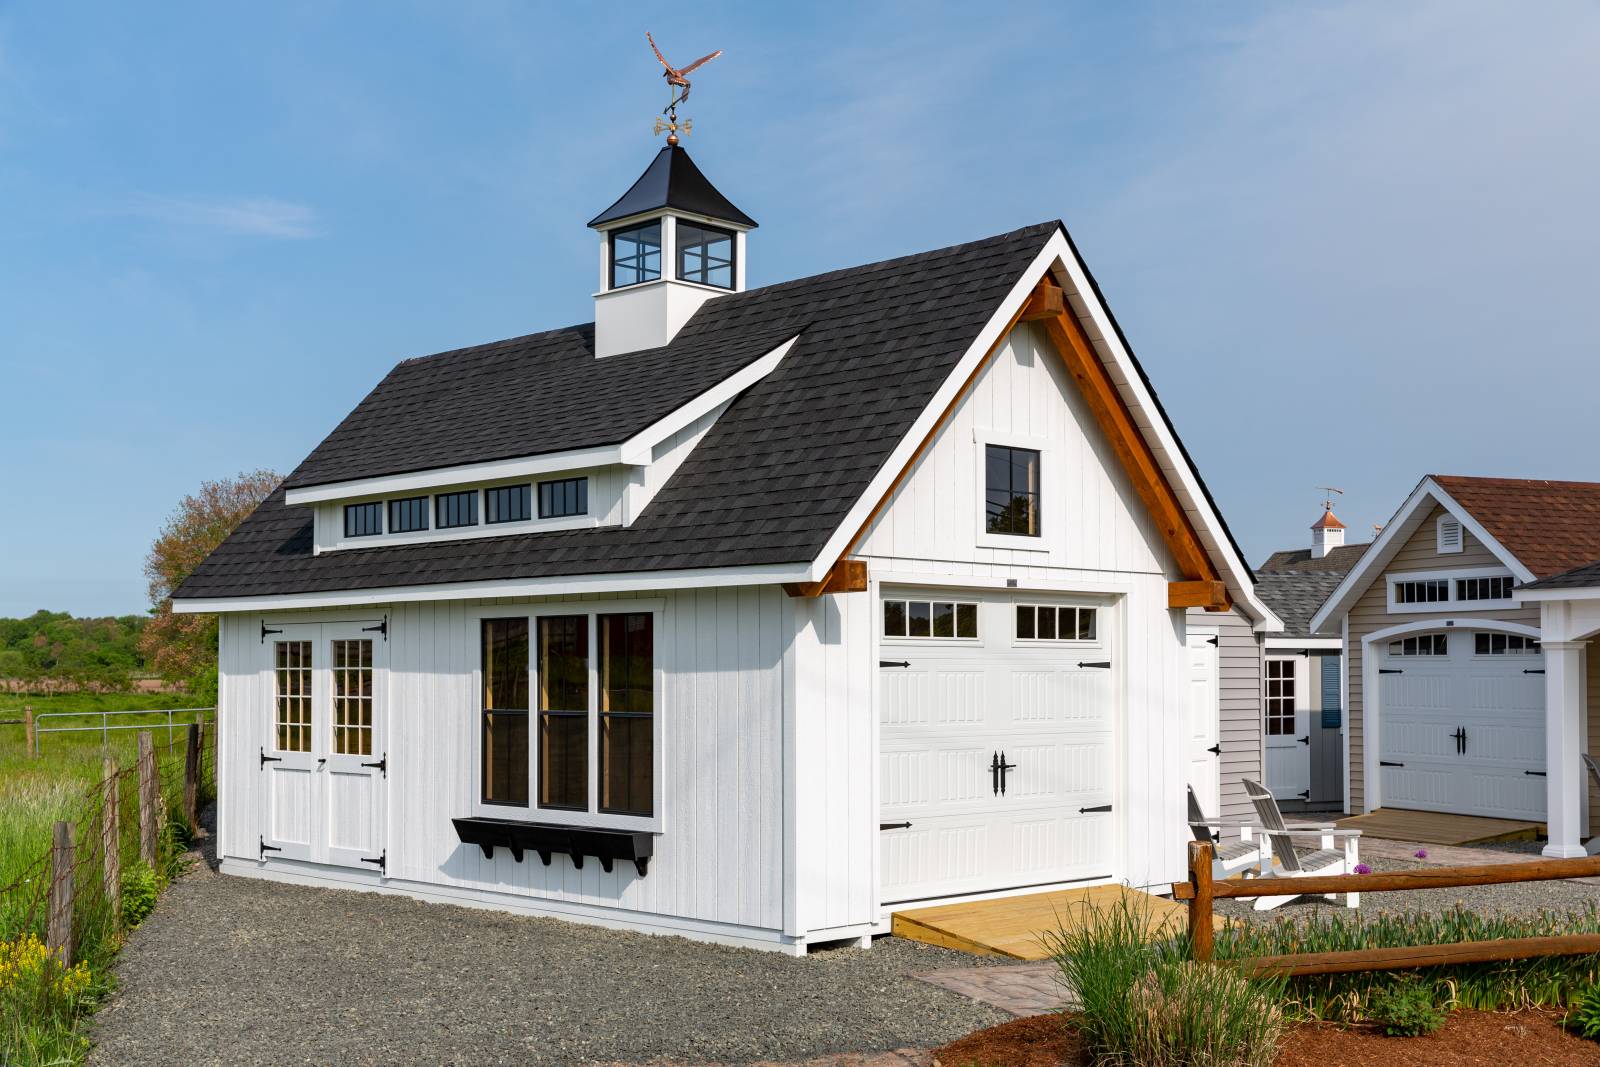 14' x 24' Grand Victorian Cape Garage Shown with Options